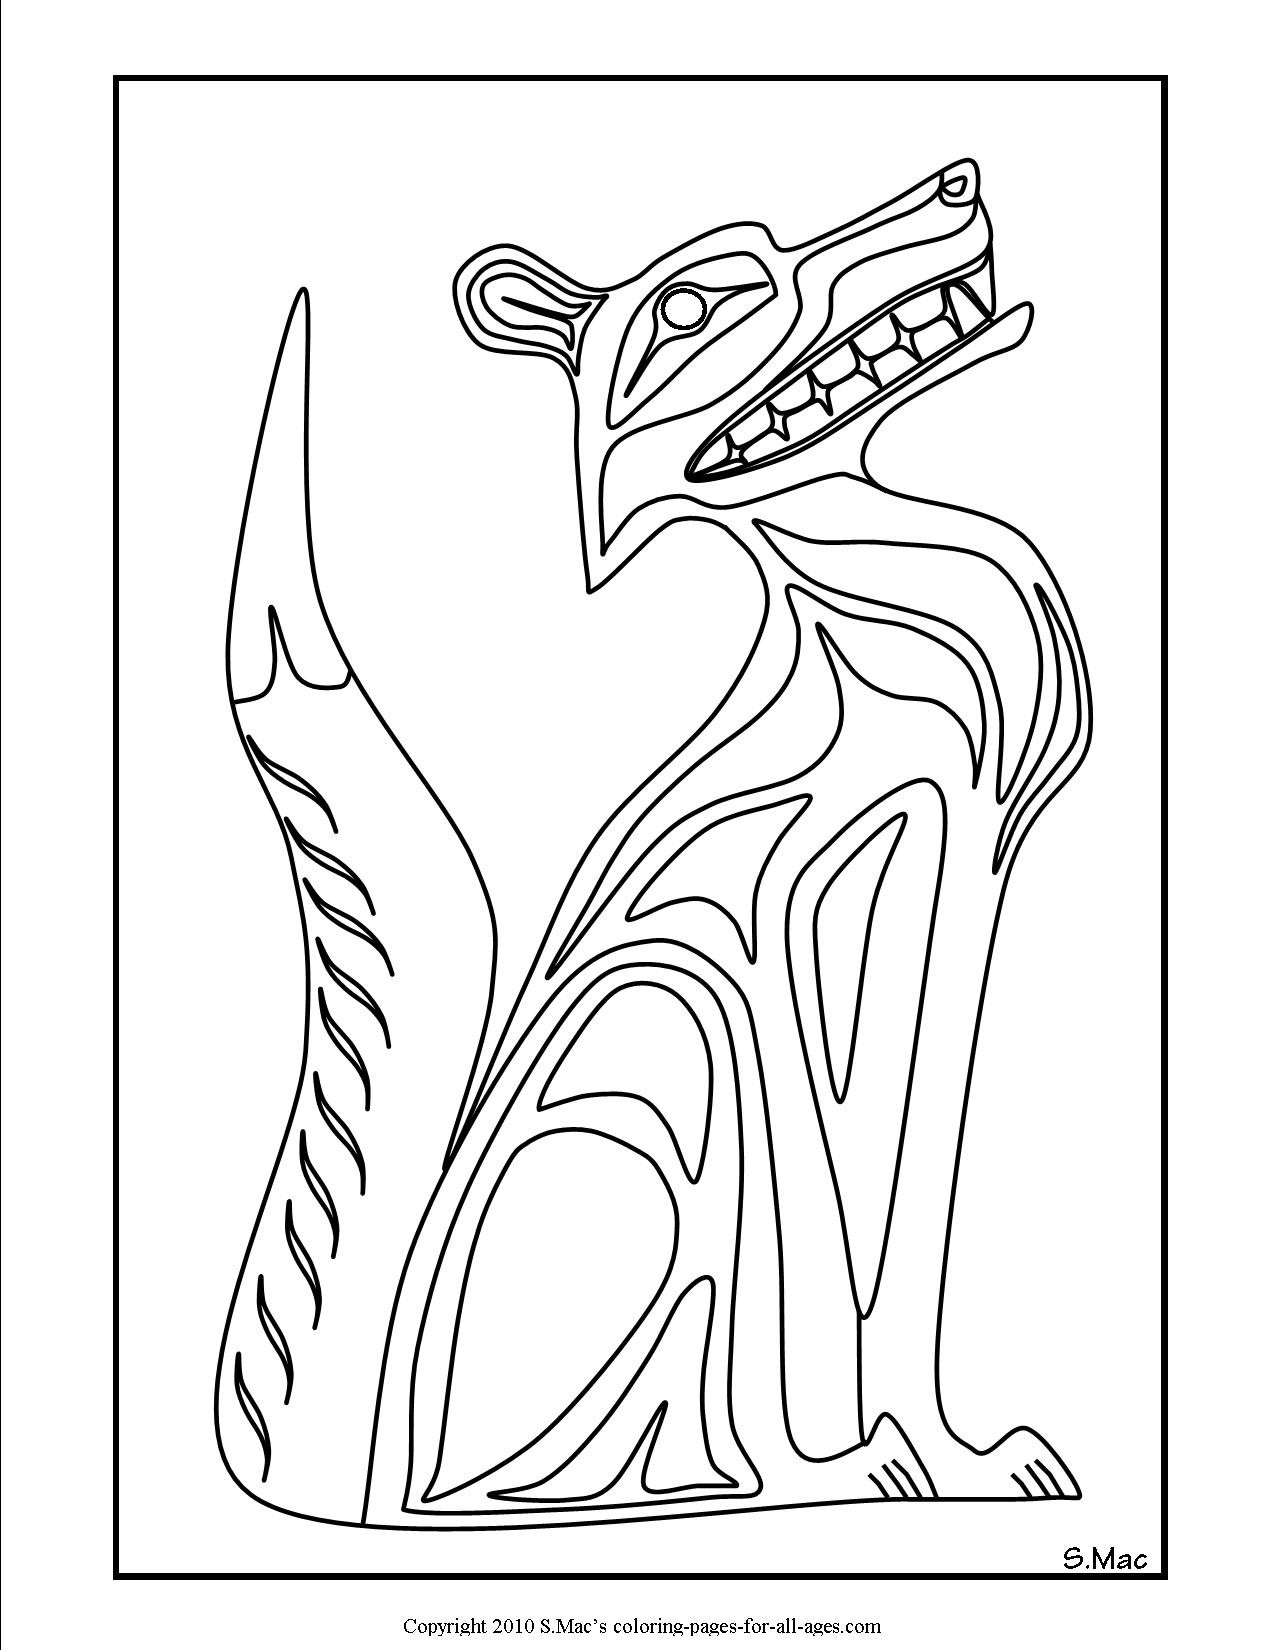 Native American Coloring Pages Printables
 Pacific Northwest Native American Art Coloring Pages – S